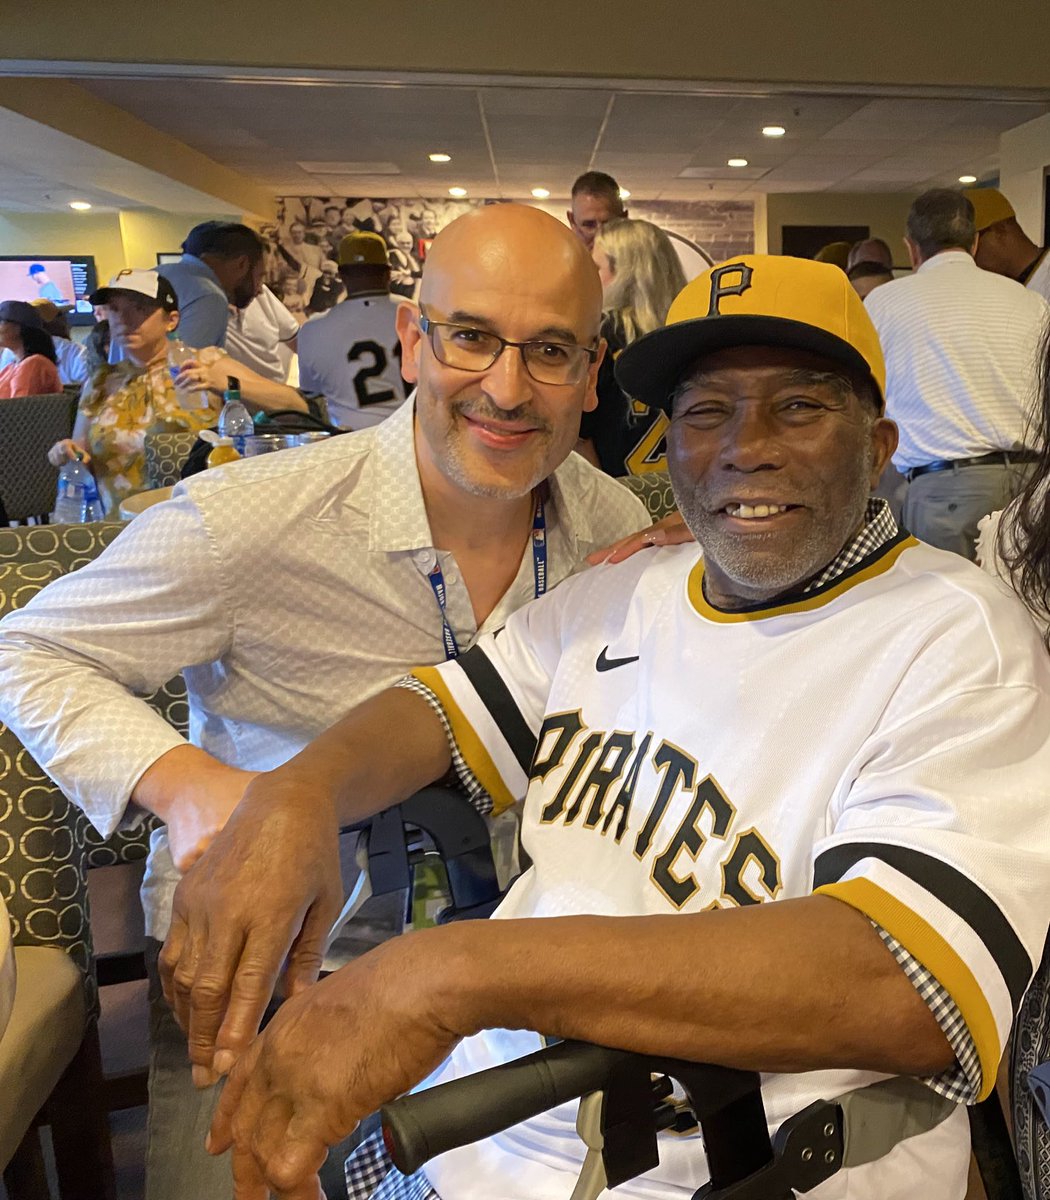 Congratulations and Felicidades @TheRealSangy35 on your induction into the Pittsburgh Pirates Hall of Fame, Class of 2024. Twenty years ago, we met at a Roberto Clemente charity event in Puerto Rico and became dear friends. “The Great One” would be overjoyed. See ya in August.